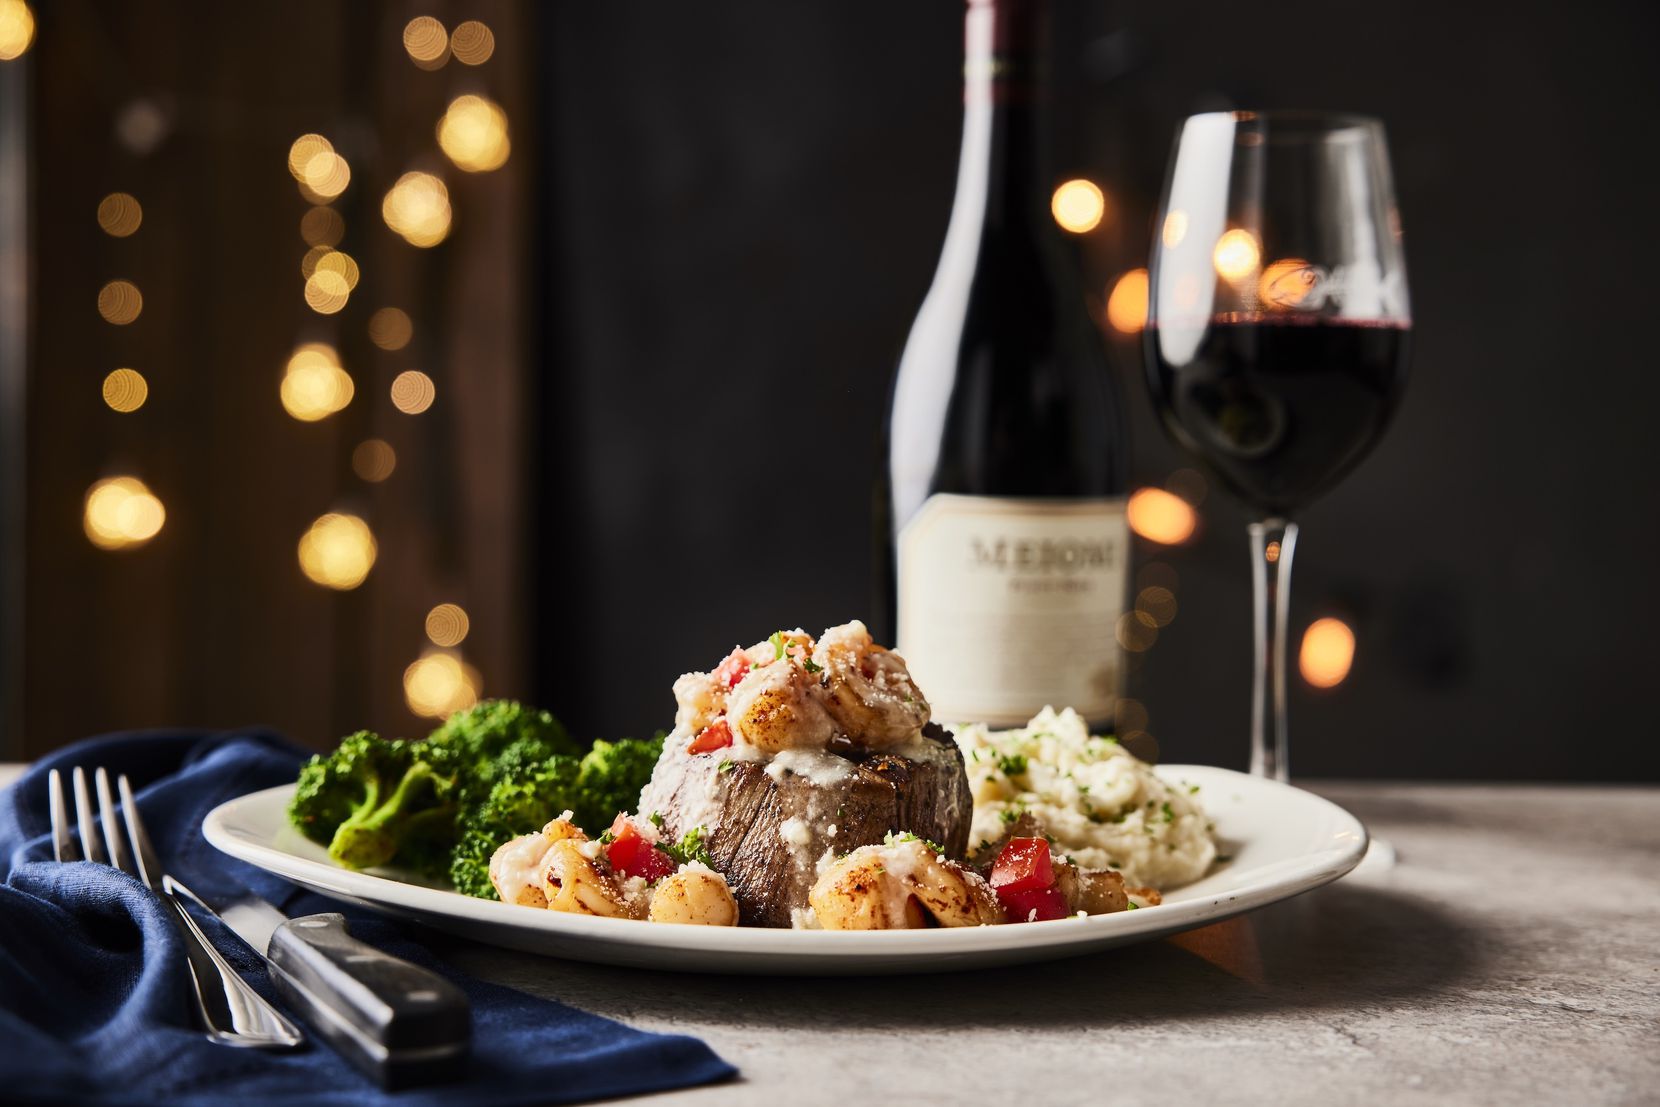 Bonefish Grill is serving a Valentine's special featuring 7-ounce wood-grilled filet mignon, topped with tender bay scallops and shrimp that's tossed in a garlic scampi sauce and finished with fresh tomatoes.